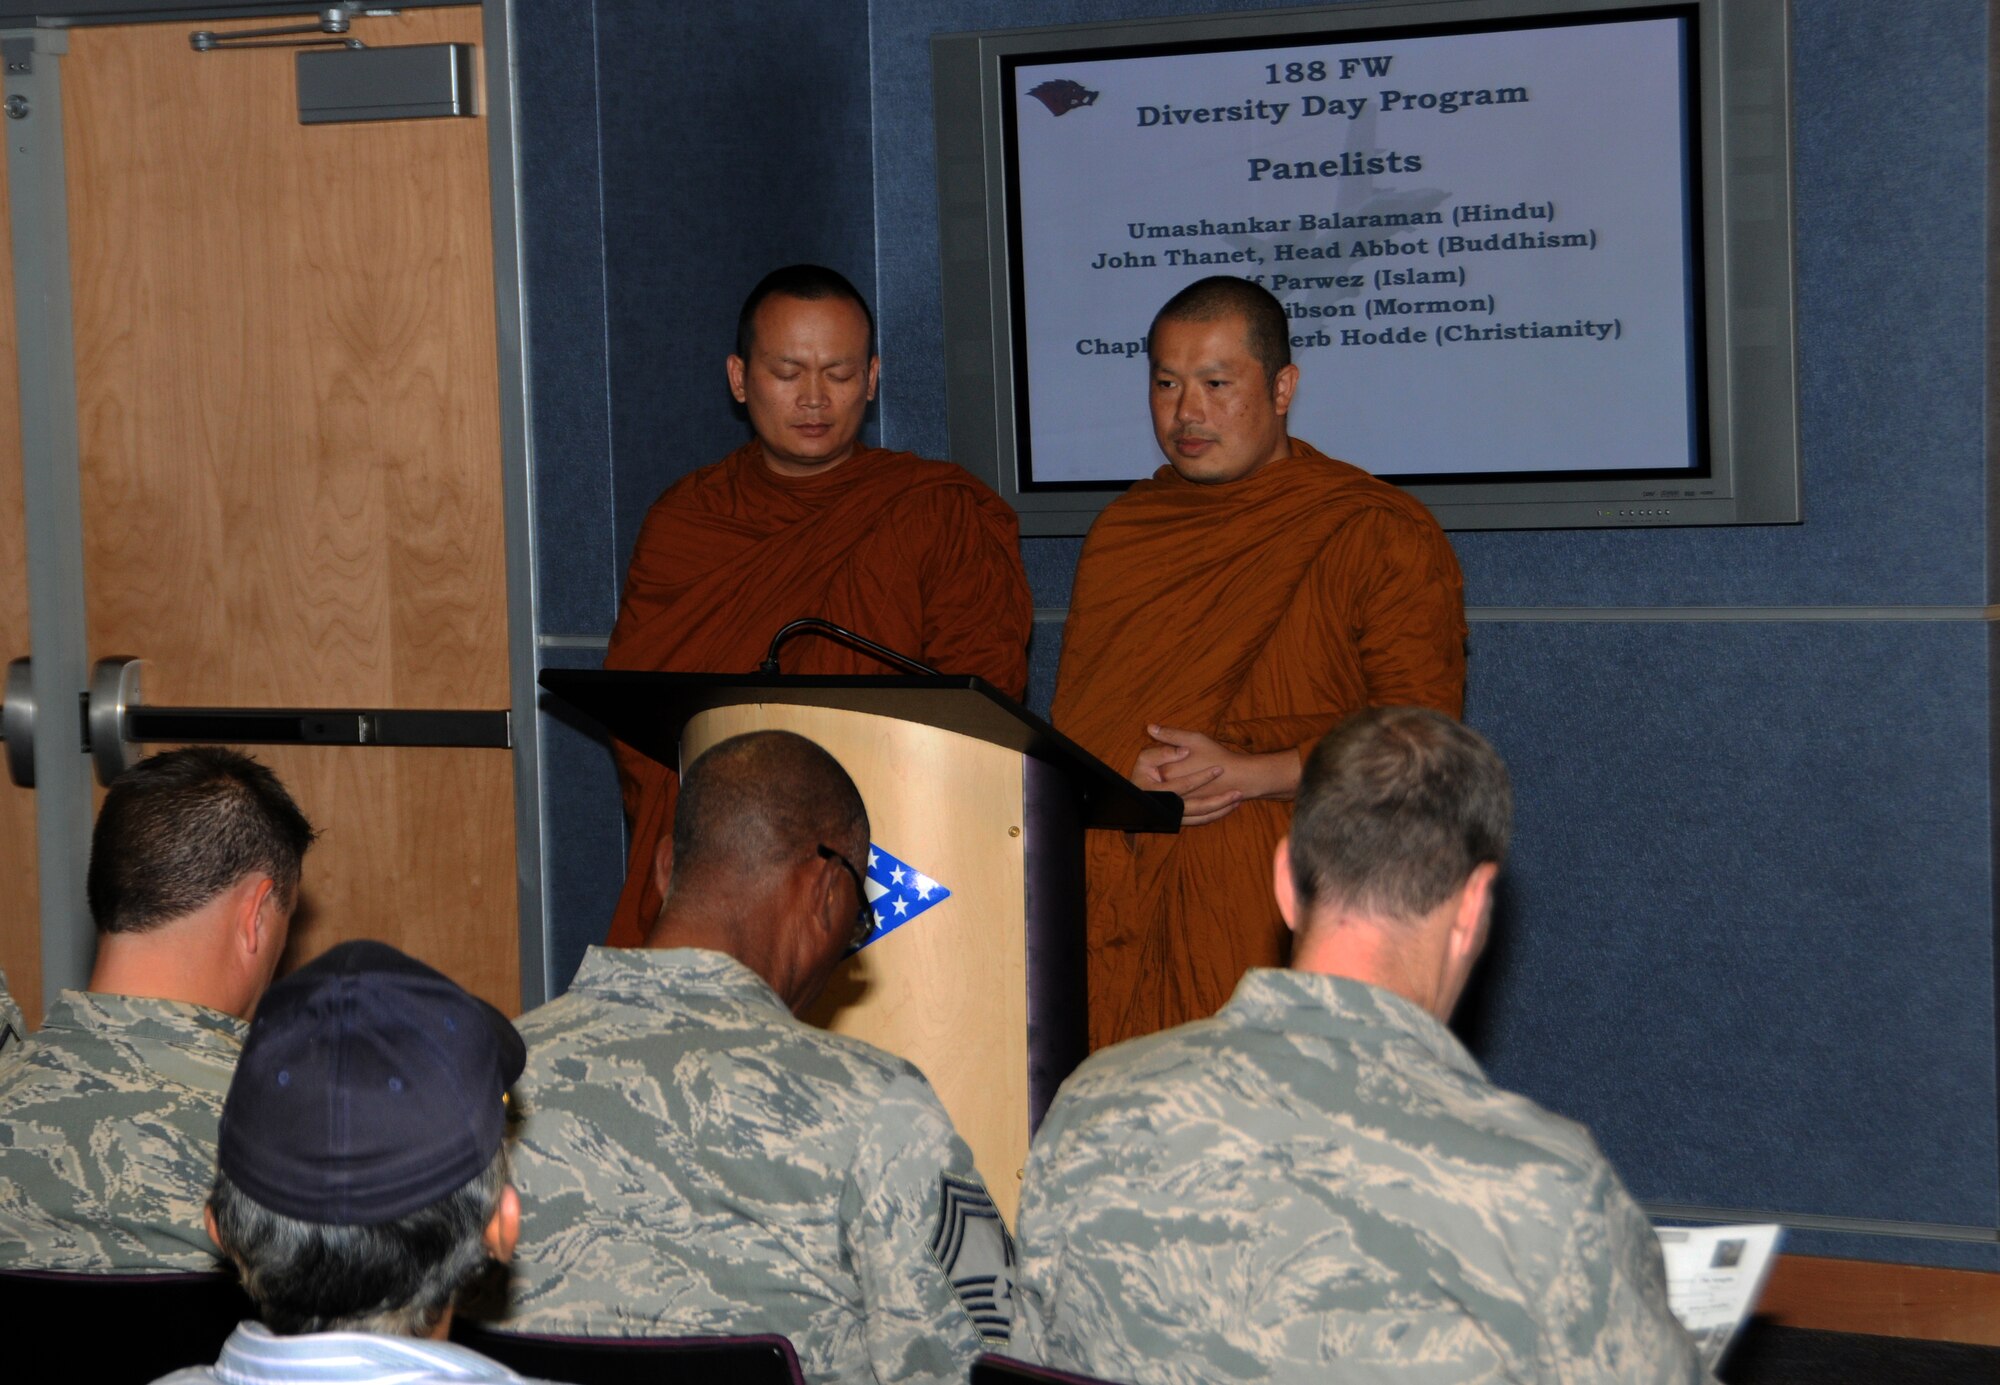 Local religious leaders visited the 188th Fighter Wing as part of a religious diversity program for unit members Sept. 8, 2013. The program featured Hinduism, Buddhism, Islam, Mormon, and protestant Christianity. Each leader provided a presentation of the fundamental beliefs and customs of their respective religions and took questions from the attendees following the presentation, which was orchestrated by the 188th Equal Opportunity Office. (U.S. Air National Guard photo by Airman 1st Class Cody Martin/188th Fighter Wing Public Affairs).